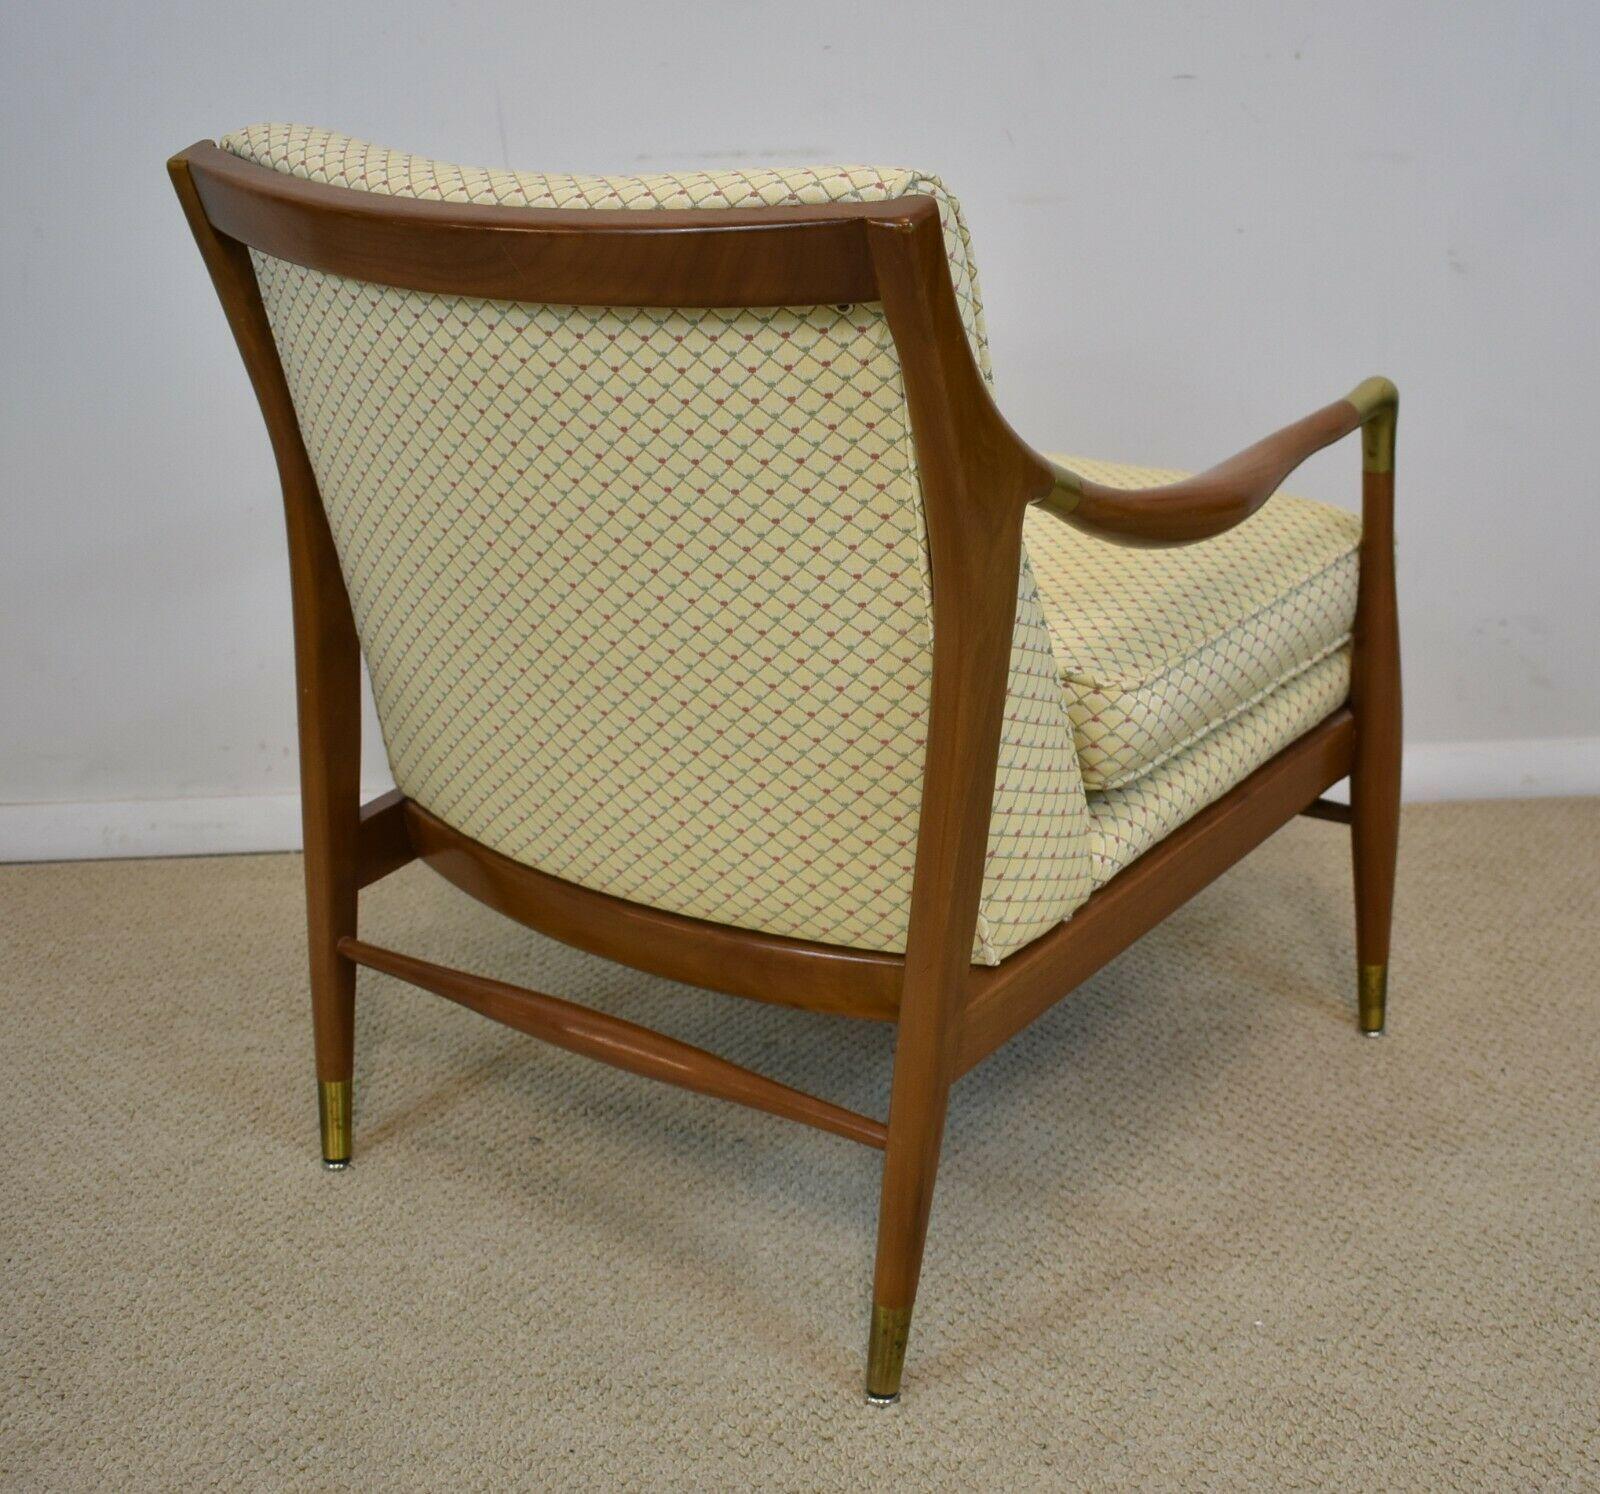 20th Century Sculpted Danish Brass Accented Lounge Chair Attributed To IB Kofod-Larsen, 1960s